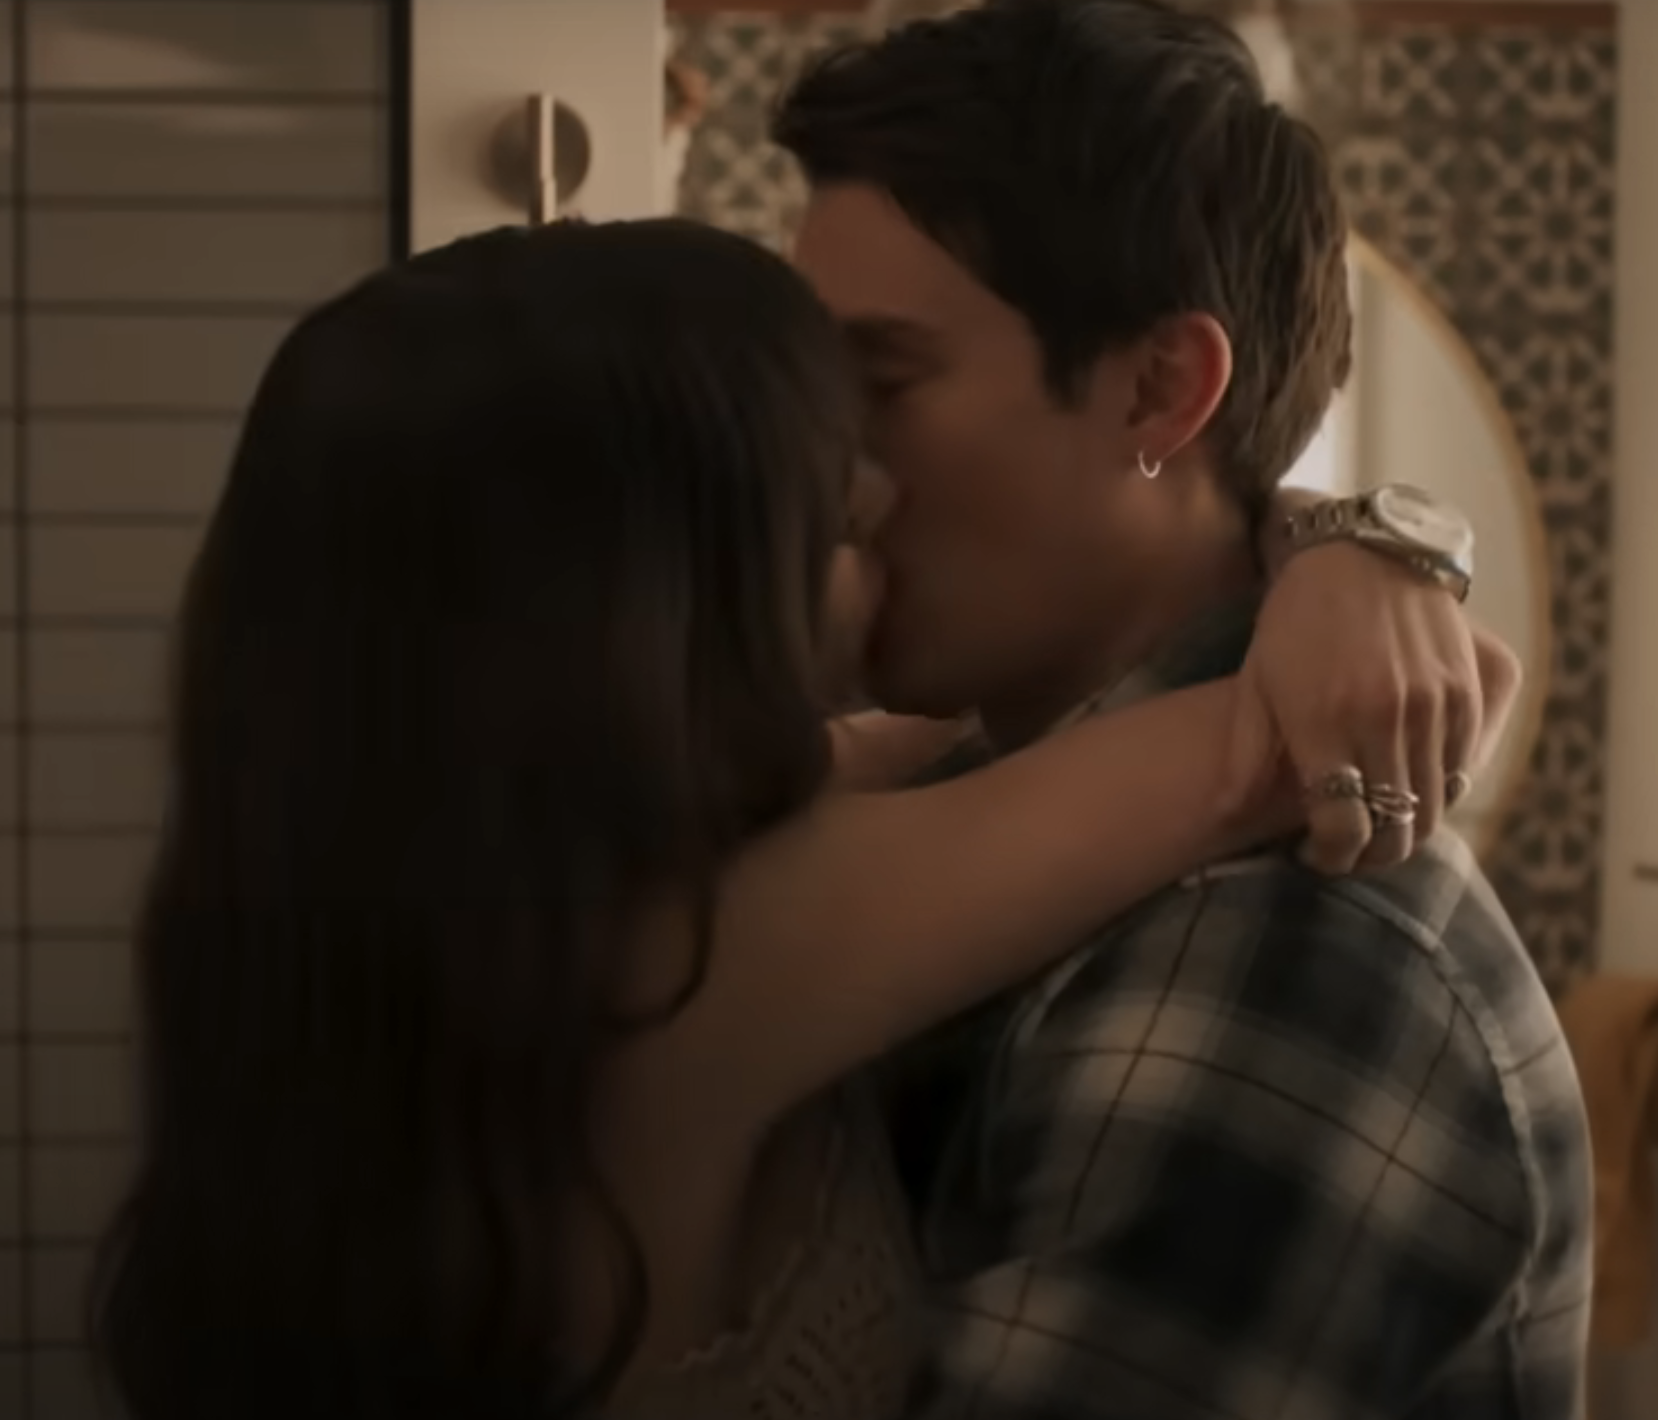 Anne Hathaway and Nicholas Galitzine kissing in a scene from in The Idea of You